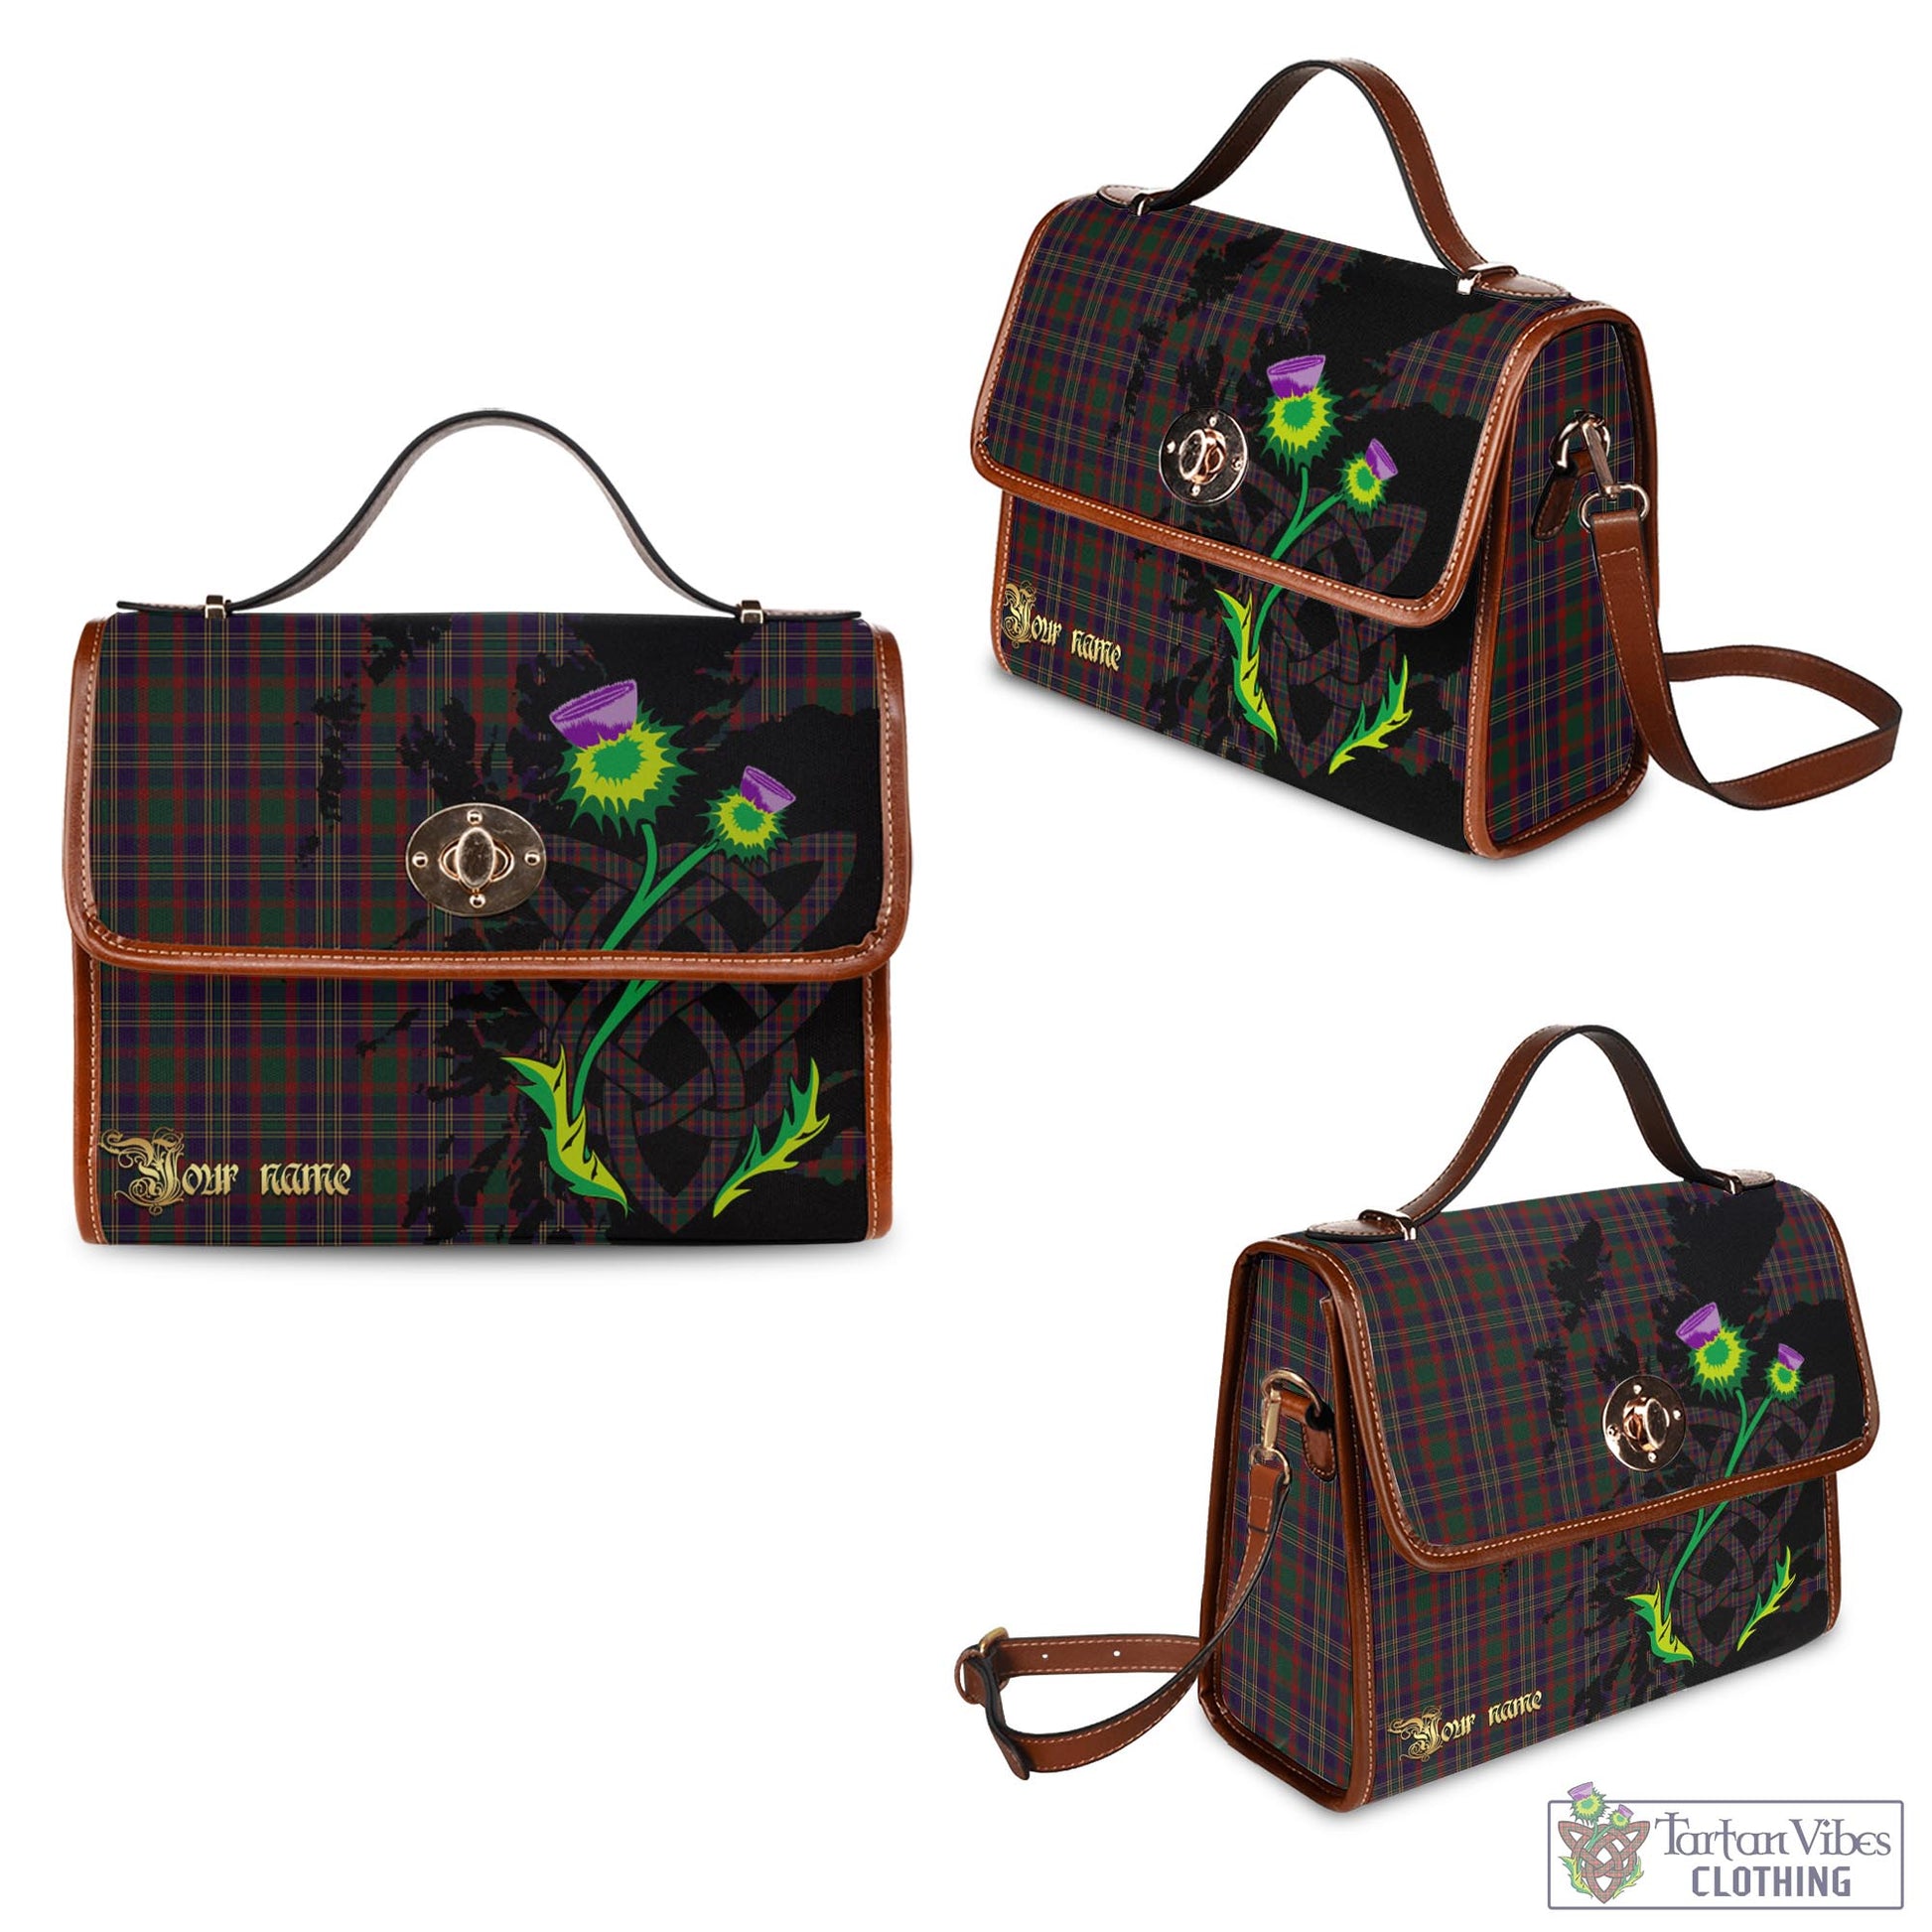 Tartan Vibes Clothing Cork County Ireland Tartan Waterproof Canvas Bag with Scotland Map and Thistle Celtic Accents